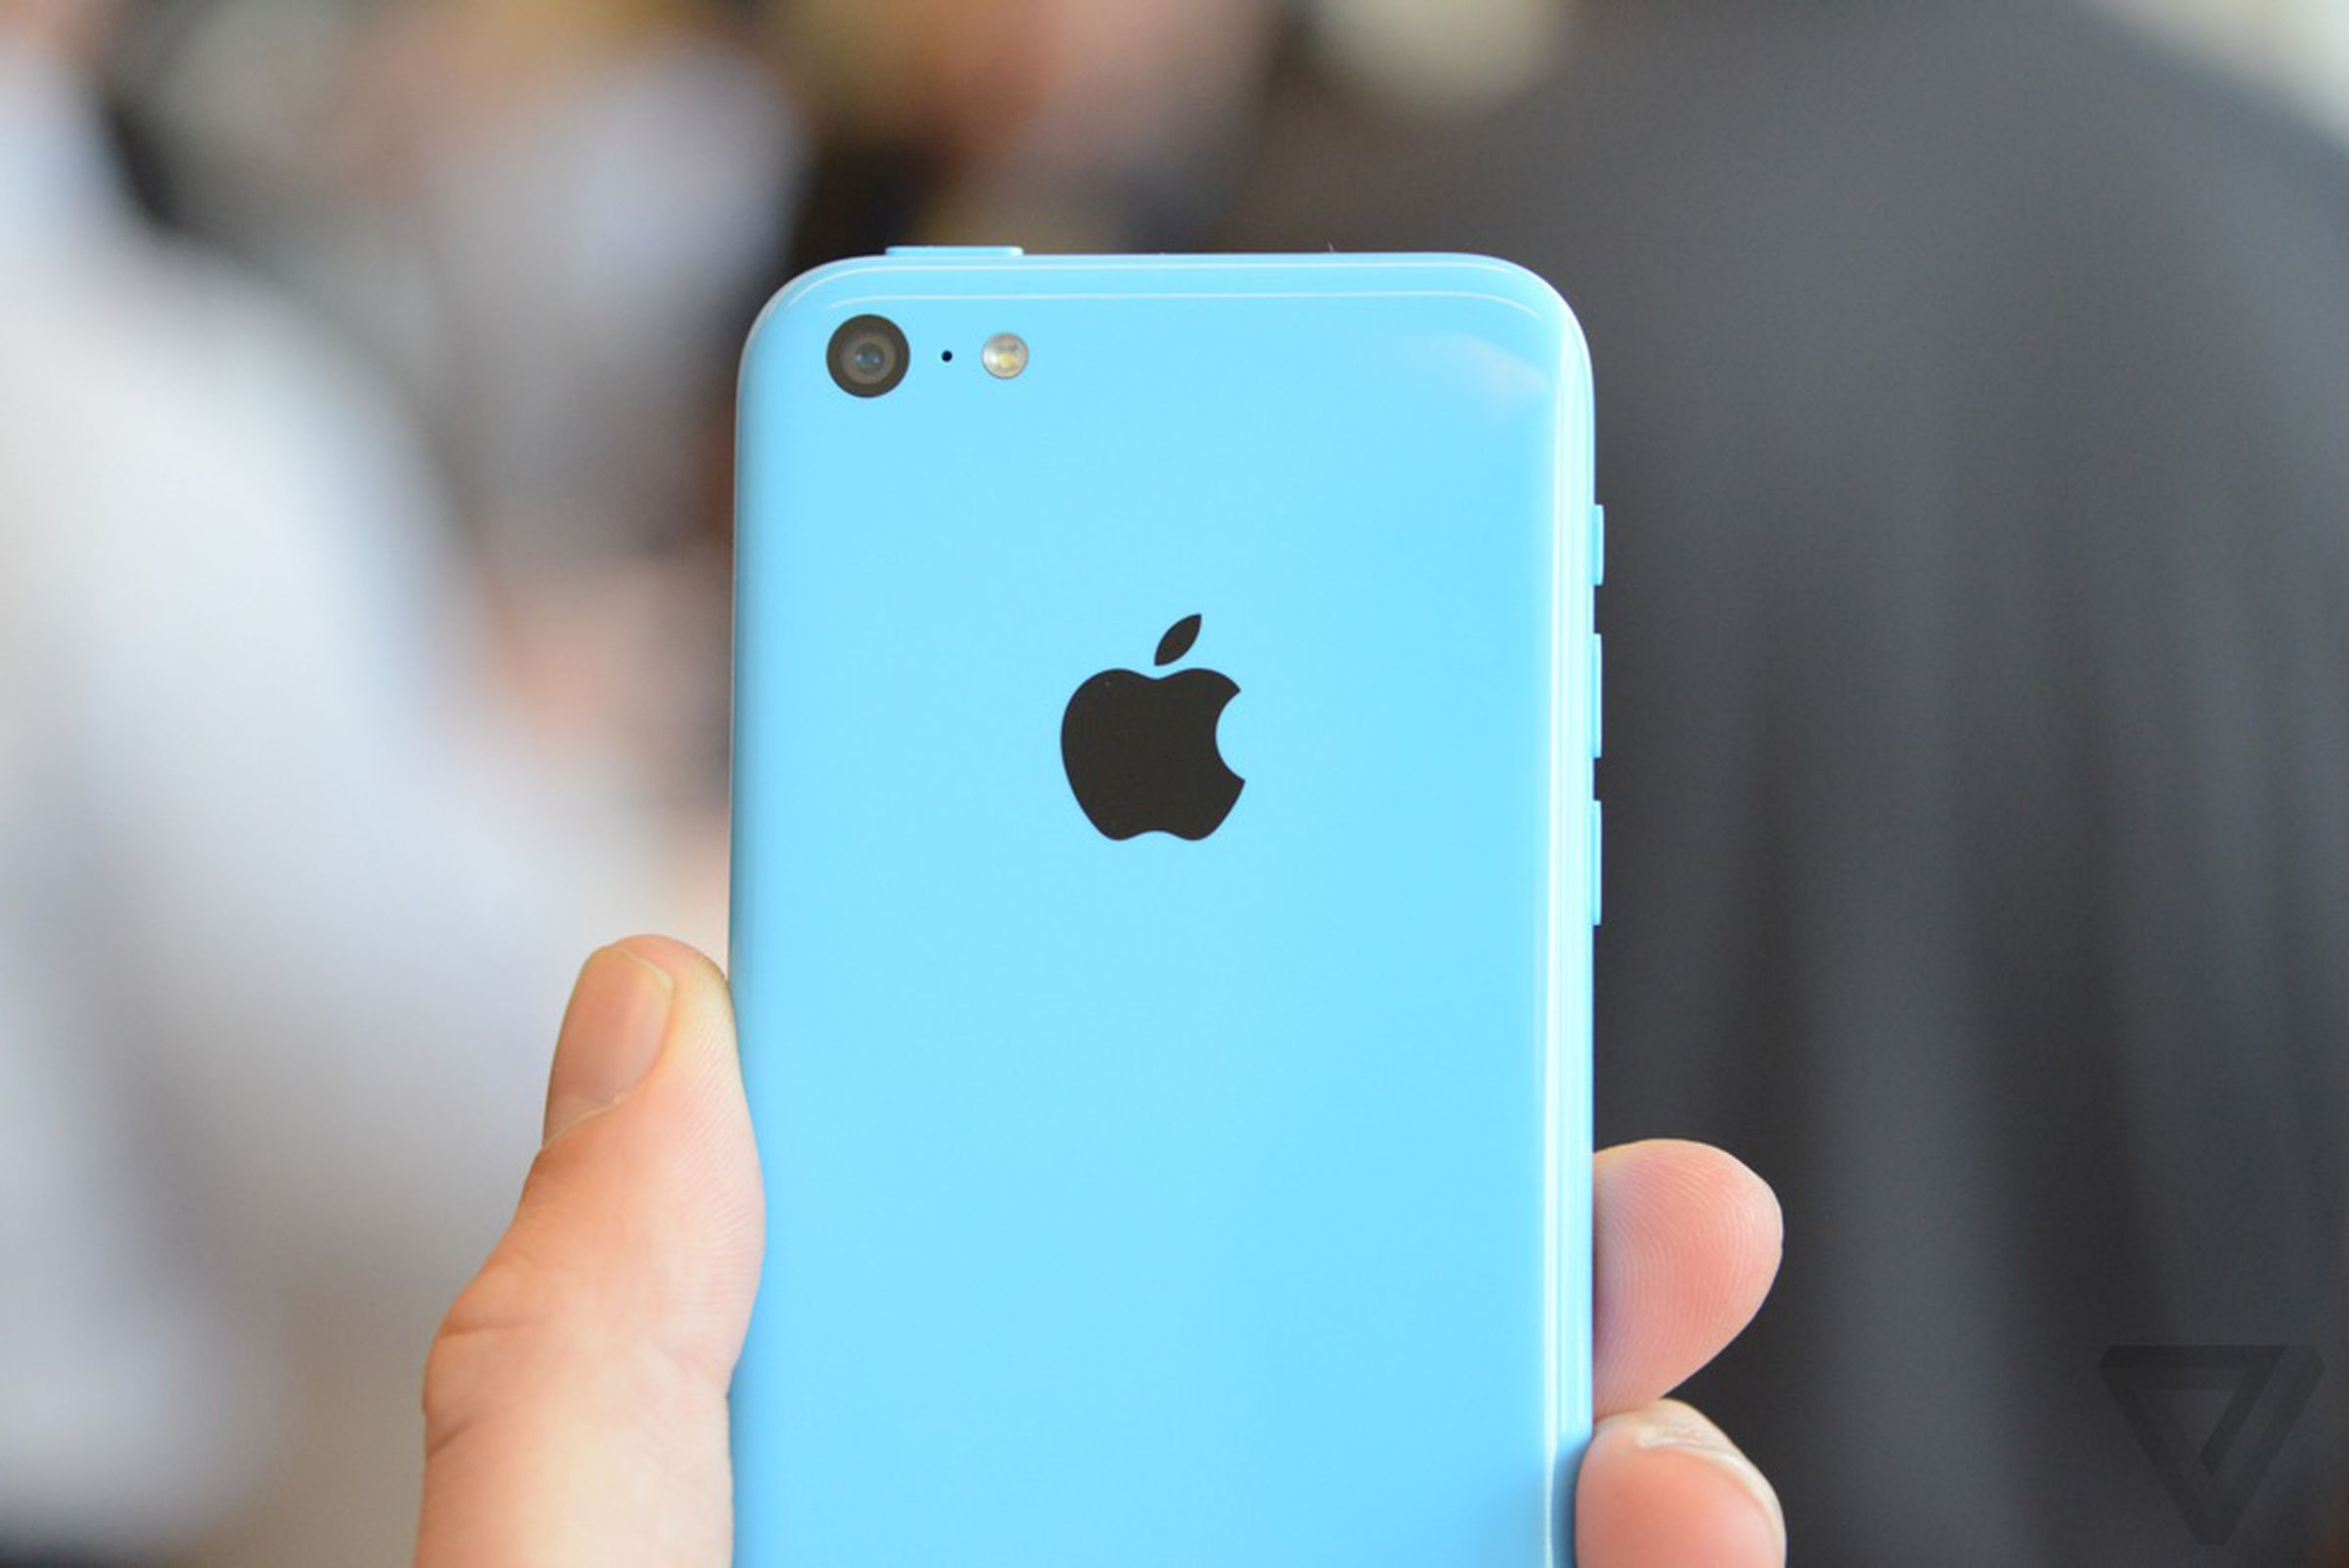 Apple iPhone 5C hands-on pictures